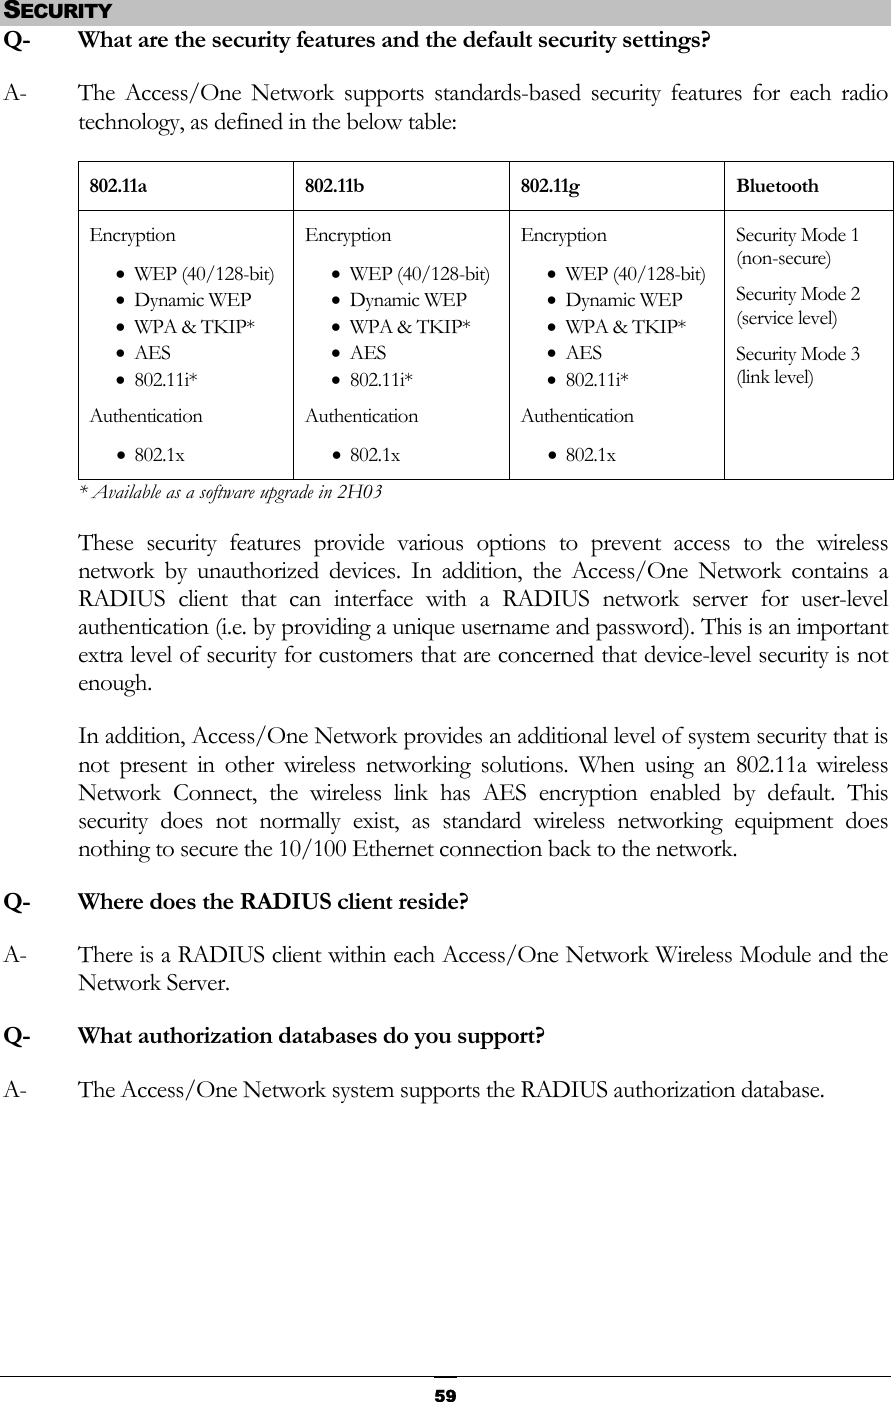  SECURITY Q-  What are the security features and the default security settings? A-  The Access/One Network supports standards-based security features for each radio technology, as defined in the below table: 802.11a 802.11b 802.11g Bluetooth Encryption • WEP (40/128-bit) • Dynamic WEP • WPA &amp; TKIP* • AES • 802.11i* Authentication • 802.1x Encryption • WEP (40/128-bit) • Dynamic WEP • WPA &amp; TKIP* • AES • 802.11i* Authentication • 802.1x Encryption • WEP (40/128-bit) • Dynamic WEP • WPA &amp; TKIP* • AES • 802.11i* Authentication • 802.1x Security Mode 1 (non-secure) Security Mode 2 (service level) Security Mode 3 (link level) * Available as a software upgrade in 2H03 These security features provide various options to prevent access to the wireless network by unauthorized devices. In addition, the Access/One Network contains a RADIUS client that can interface with a RADIUS network server for user-level authentication (i.e. by providing a unique username and password). This is an important extra level of security for customers that are concerned that device-level security is not enough. In addition, Access/One Network provides an additional level of system security that is not present in other wireless networking solutions. When using an 802.11a wireless Network Connect, the wireless link has AES encryption enabled by default. This security does not normally exist, as standard wireless networking equipment does nothing to secure the 10/100 Ethernet connection back to the network. Q-  Where does the RADIUS client reside? A-  There is a RADIUS client within each Access/One Network Wireless Module and the Network Server. Q-  What authorization databases do you support? A-  The Access/One Network system supports the RADIUS authorization database.     59